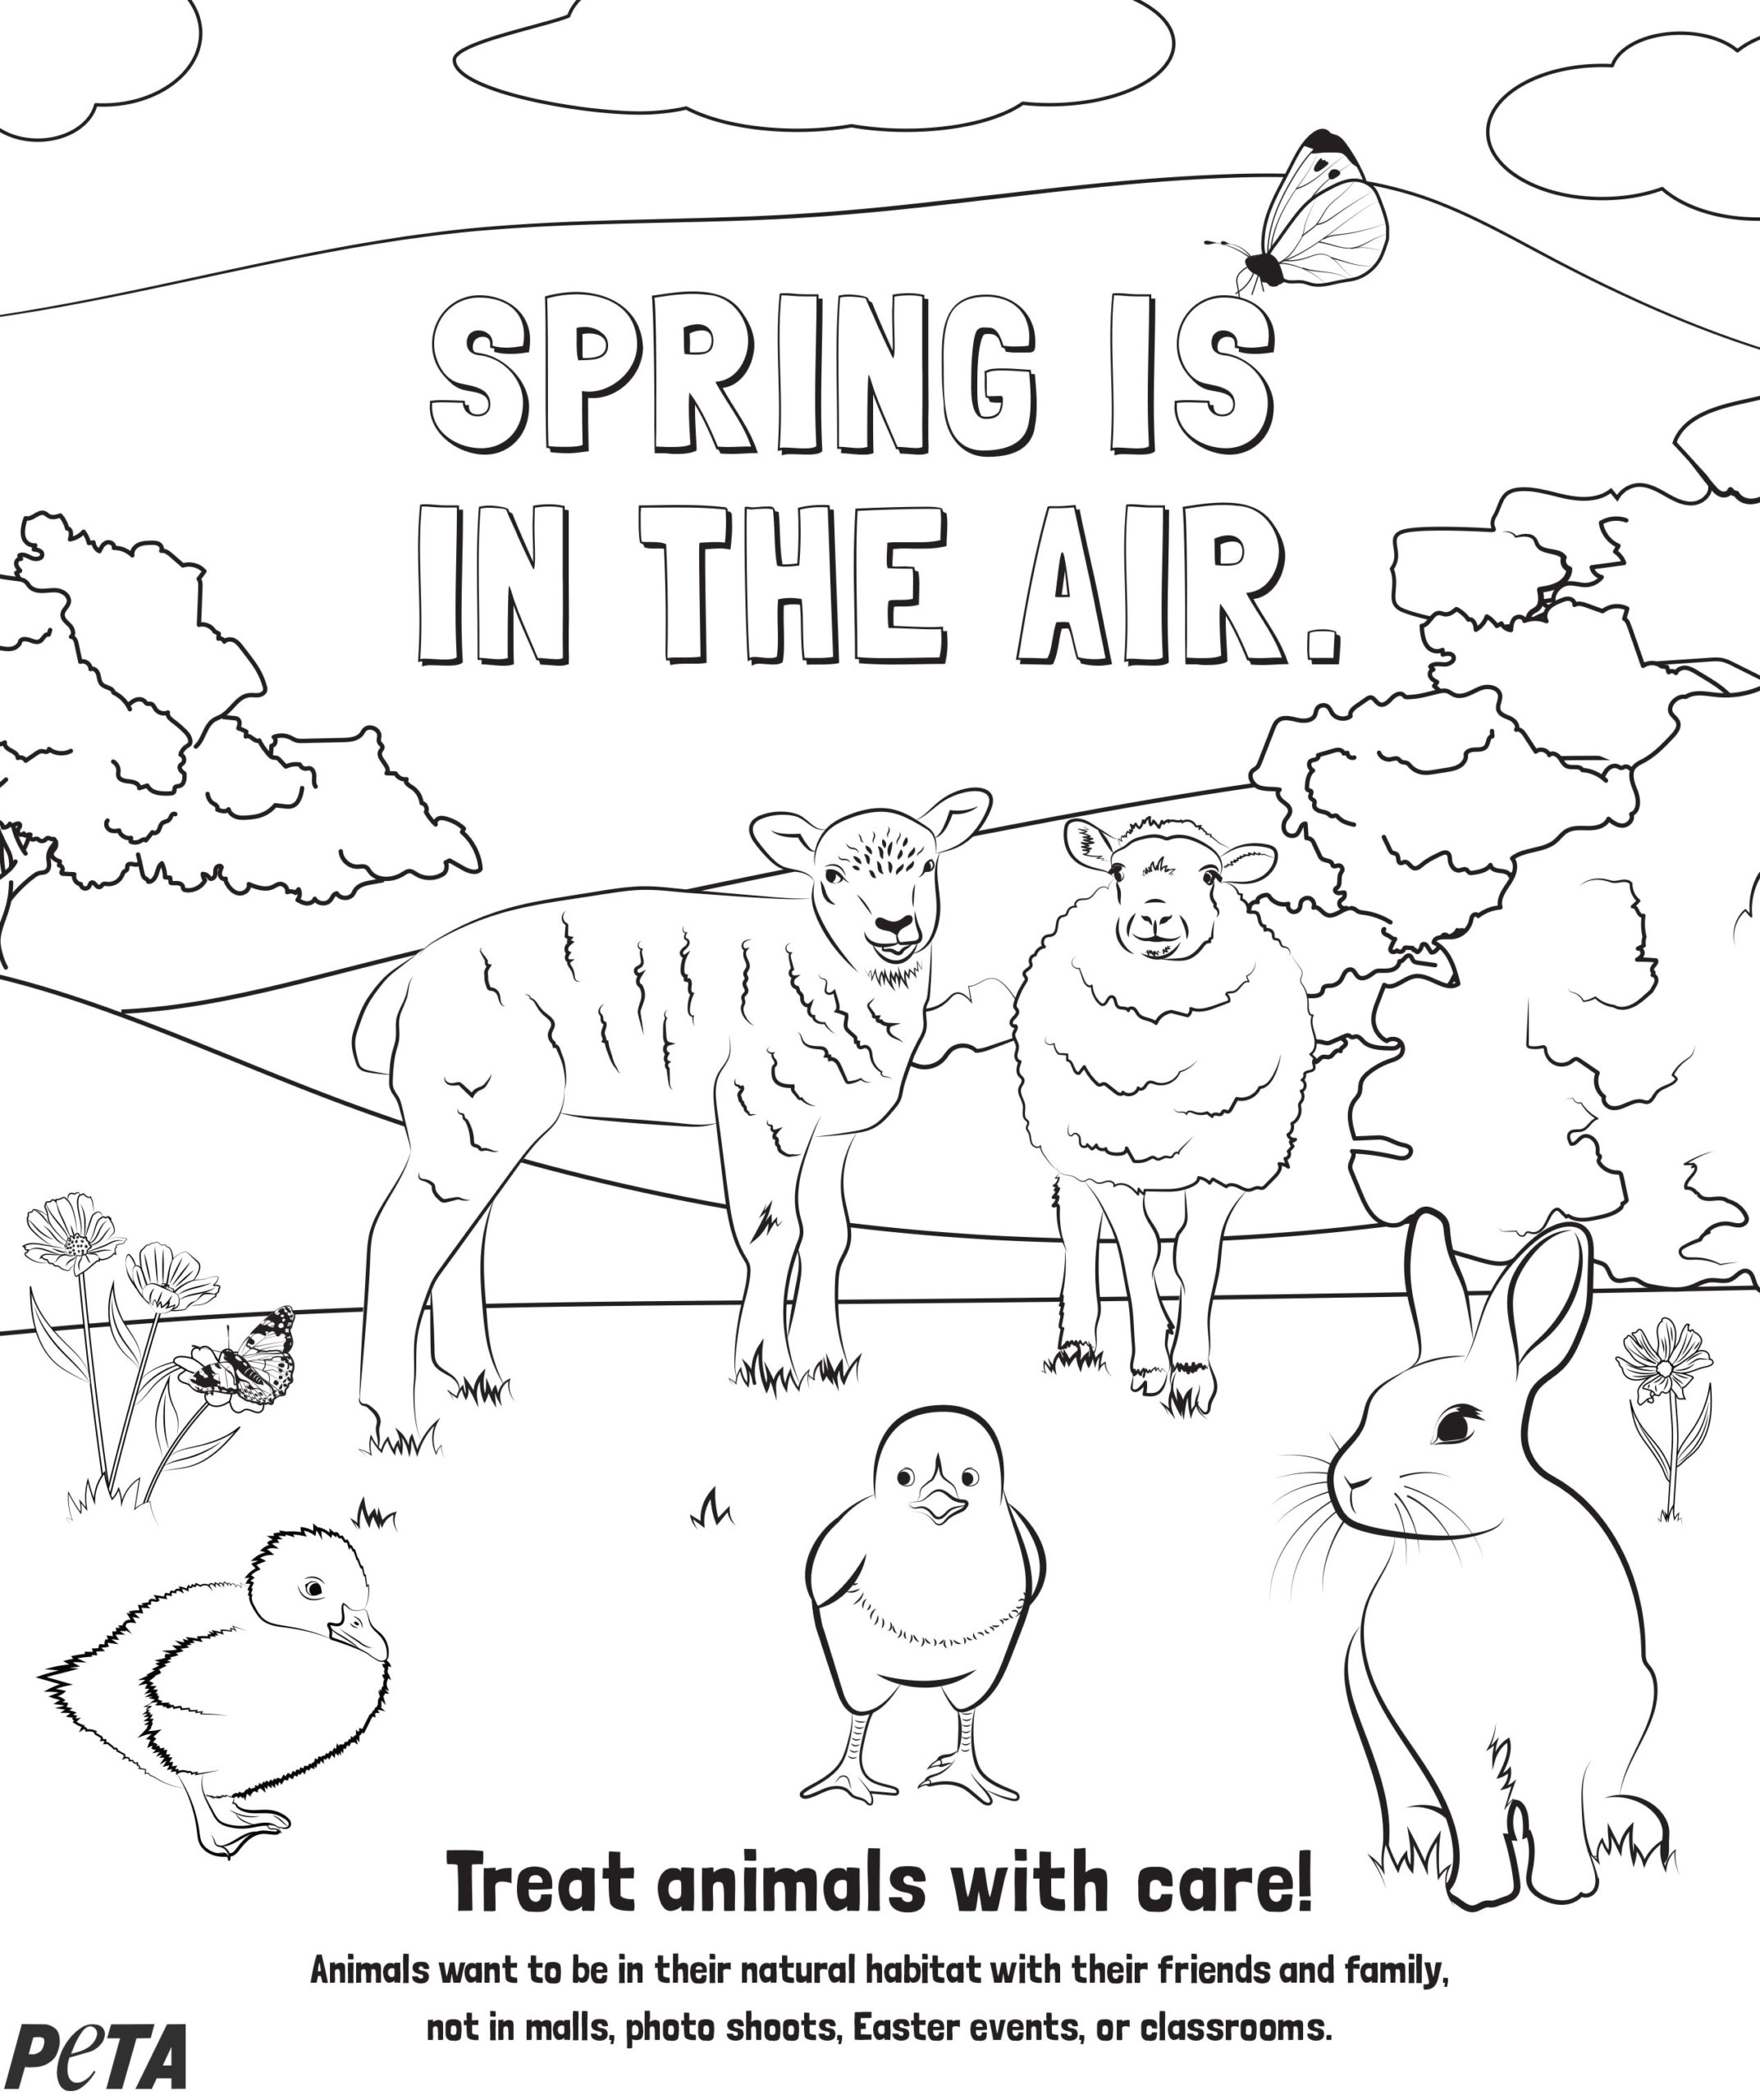 Bored Get Creative With These PETA Coloring Pages   Action Center ...